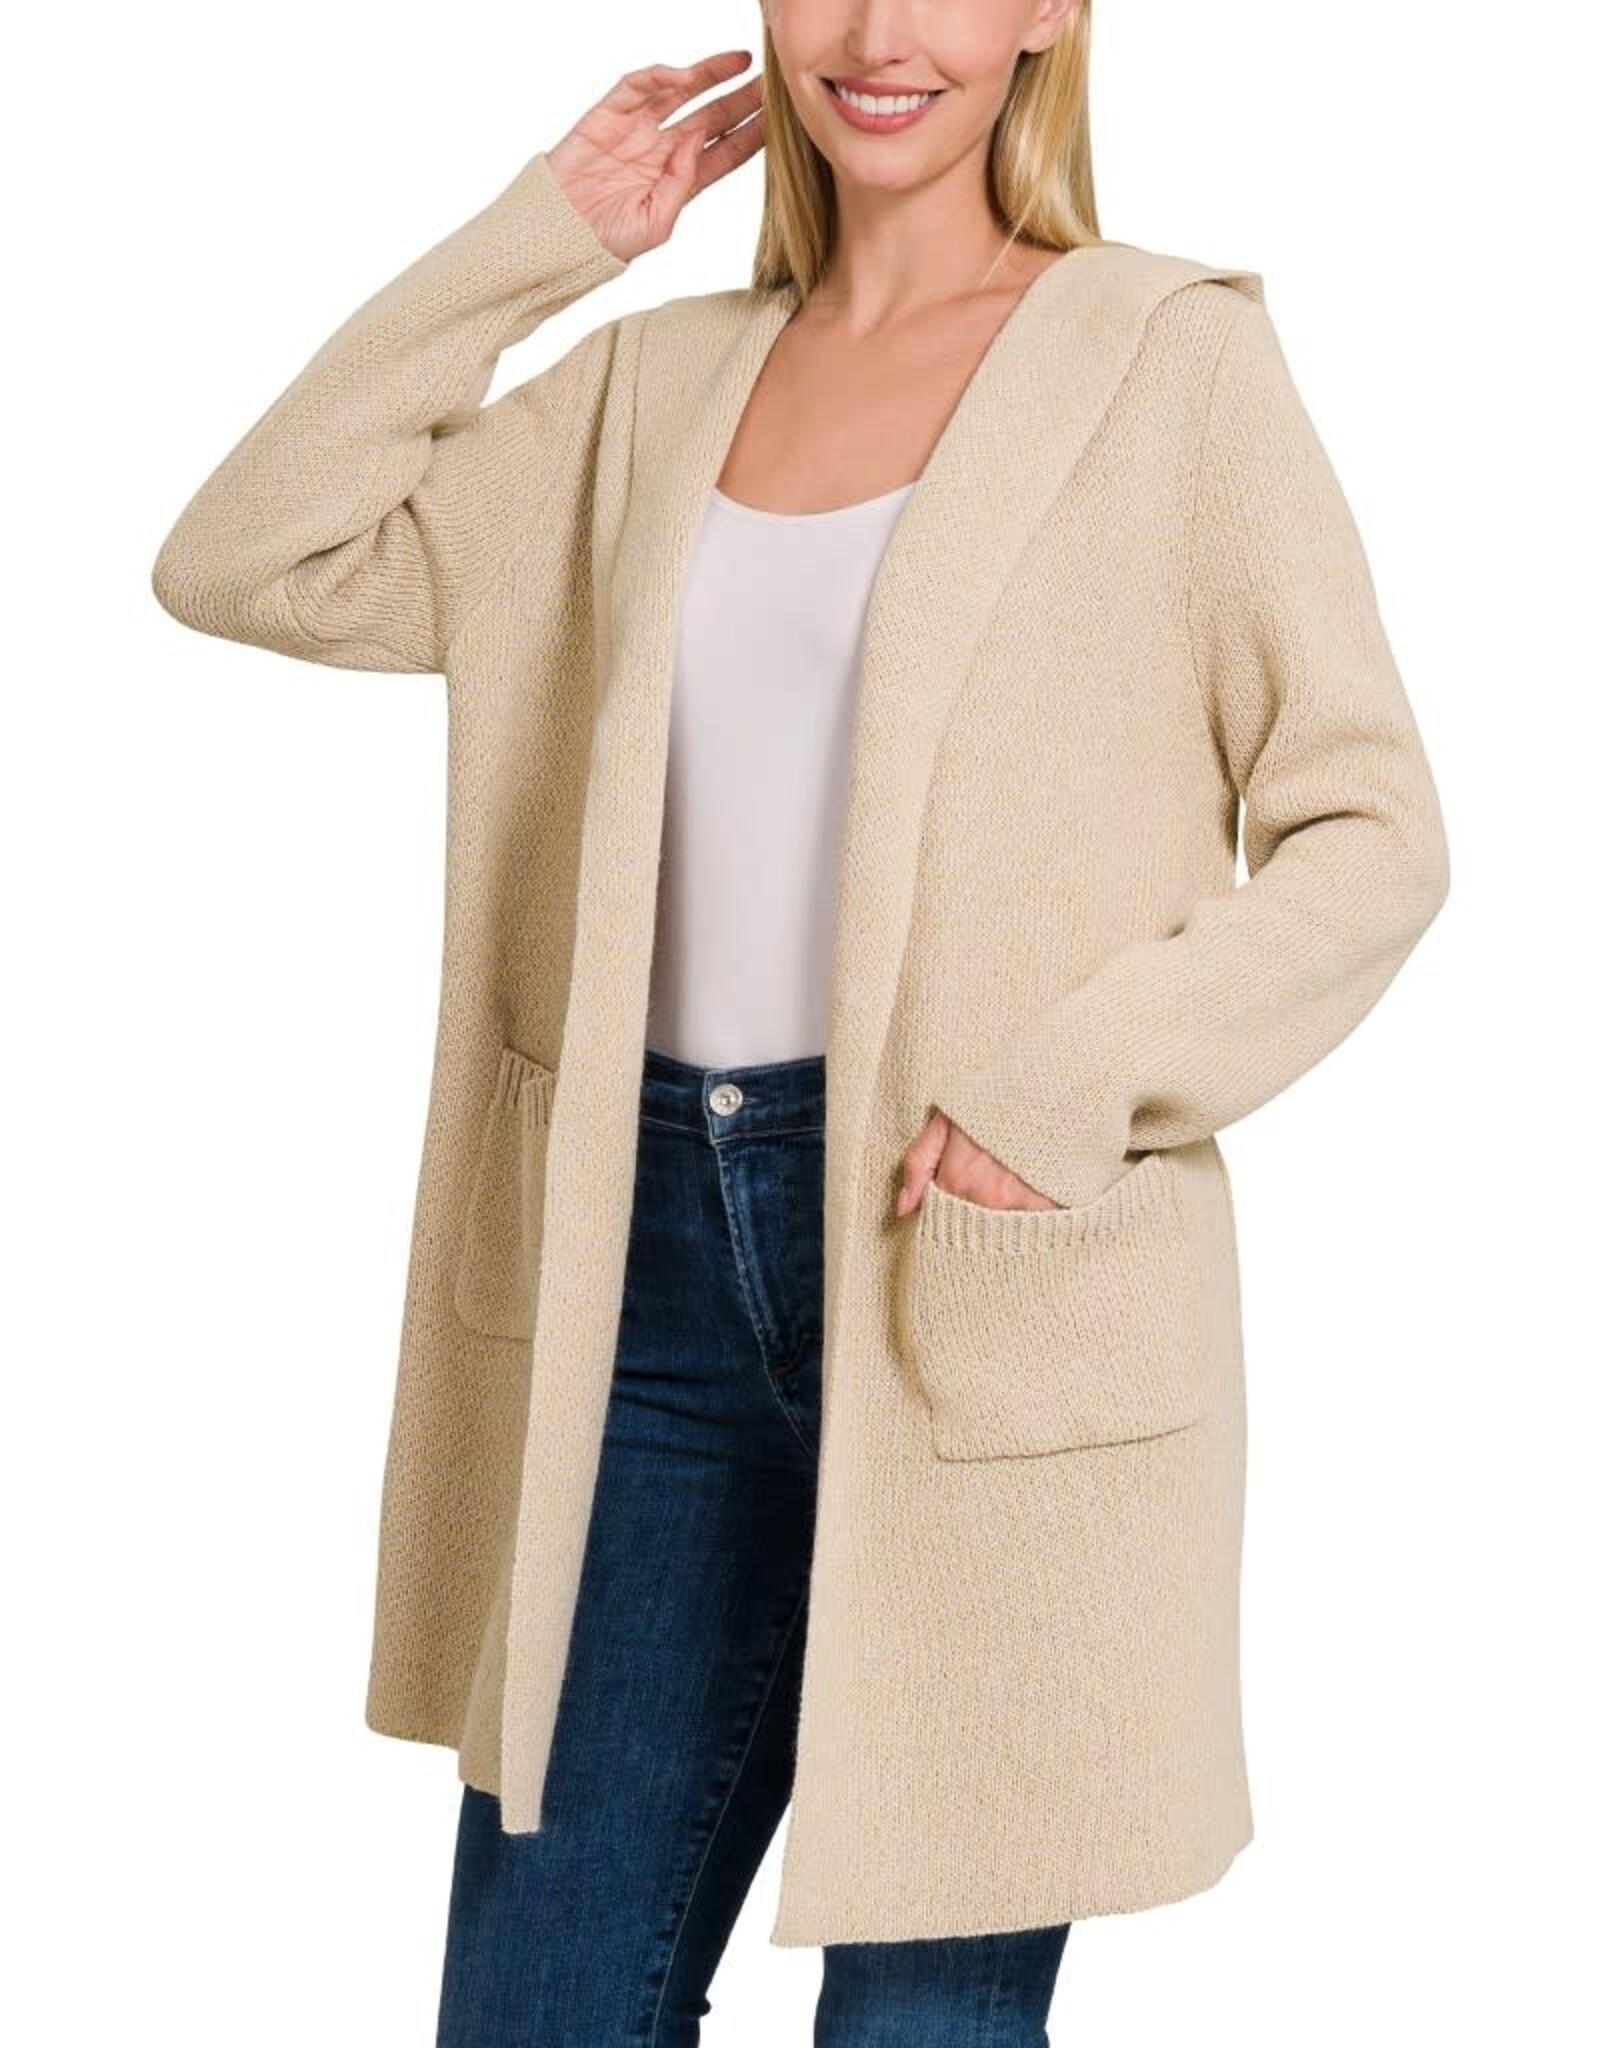 Miss Bliss Hooded Open Front Sweater Cardigan